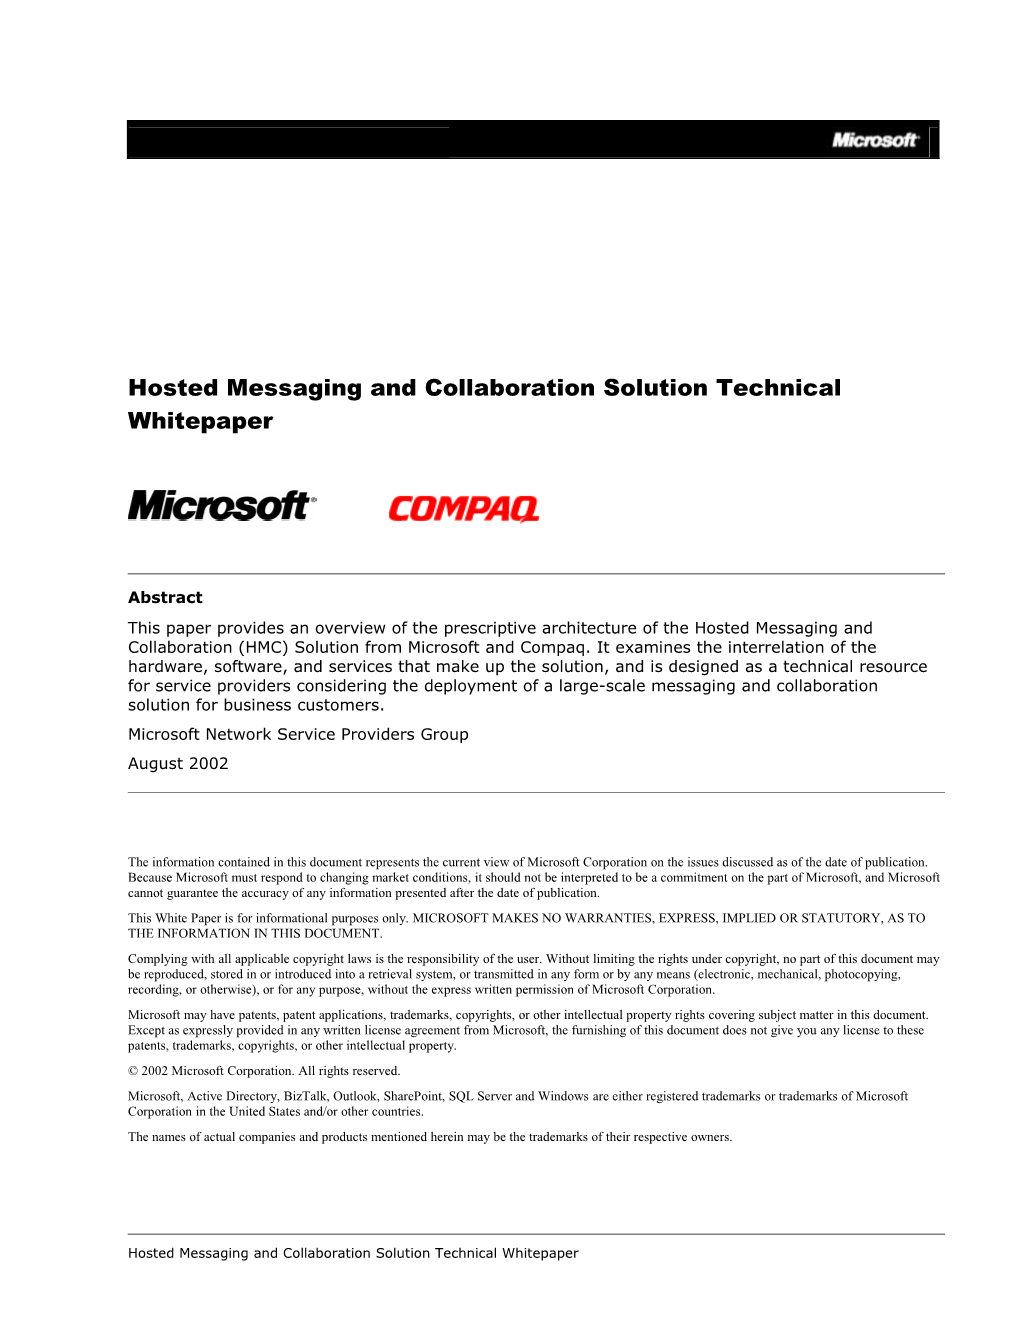 Hosted Messaging and Collaboration Solution Technical Whitepaper